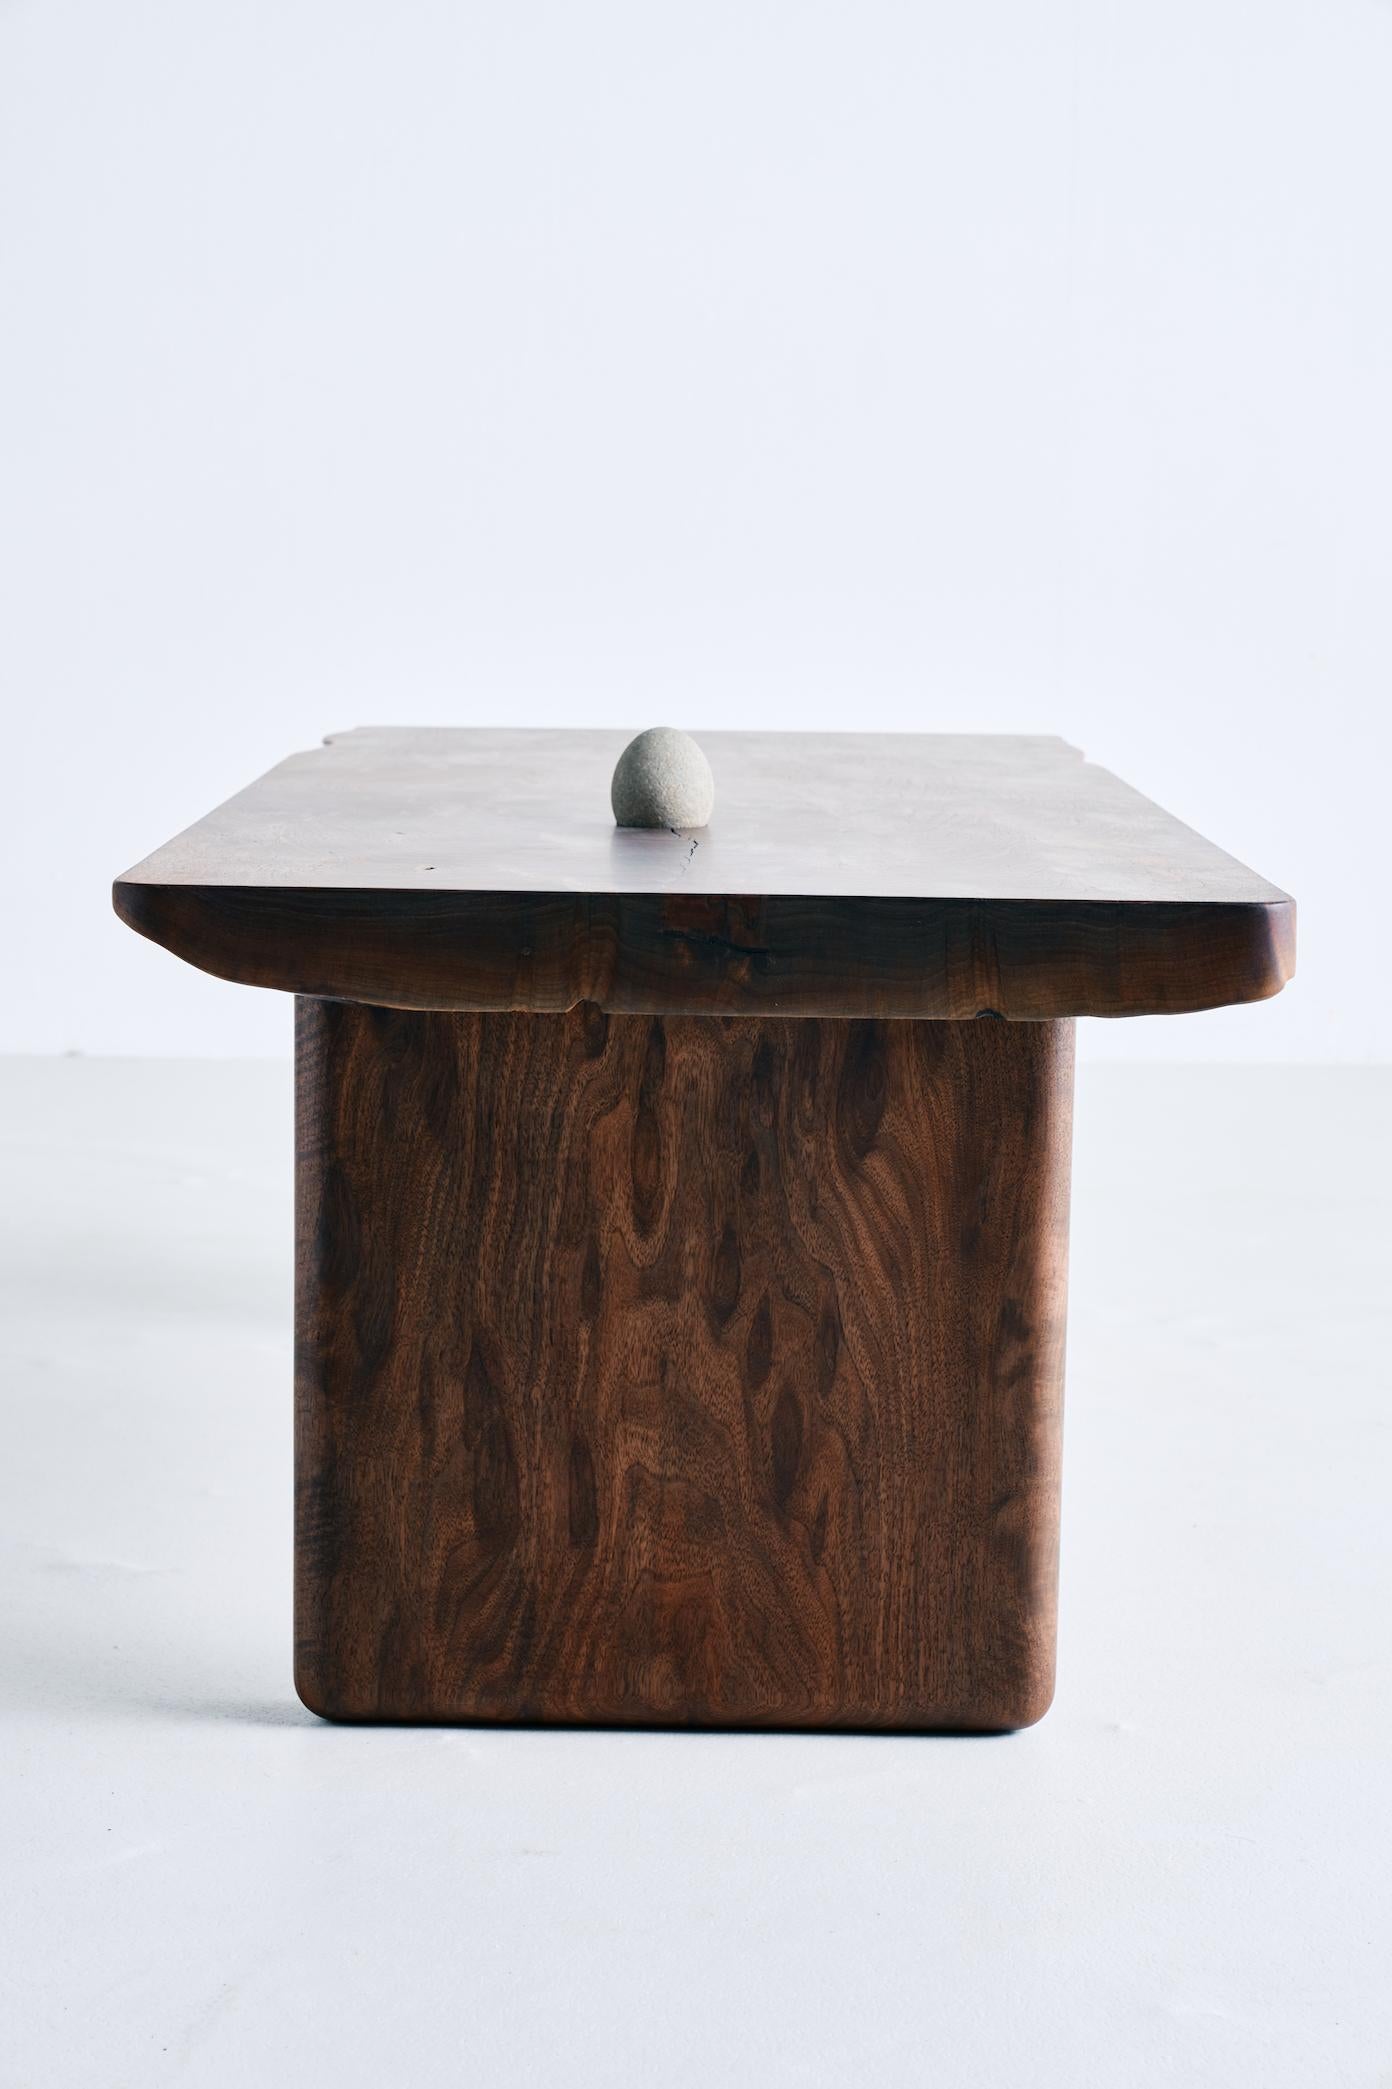 The Chasm coffee table by Brian Grasela was built from a single slab of Oregon black walnut. A beach stone found in San Diego, California is incorporated into the top along with a casted bronze burl inlay on the underside of the table. The table is